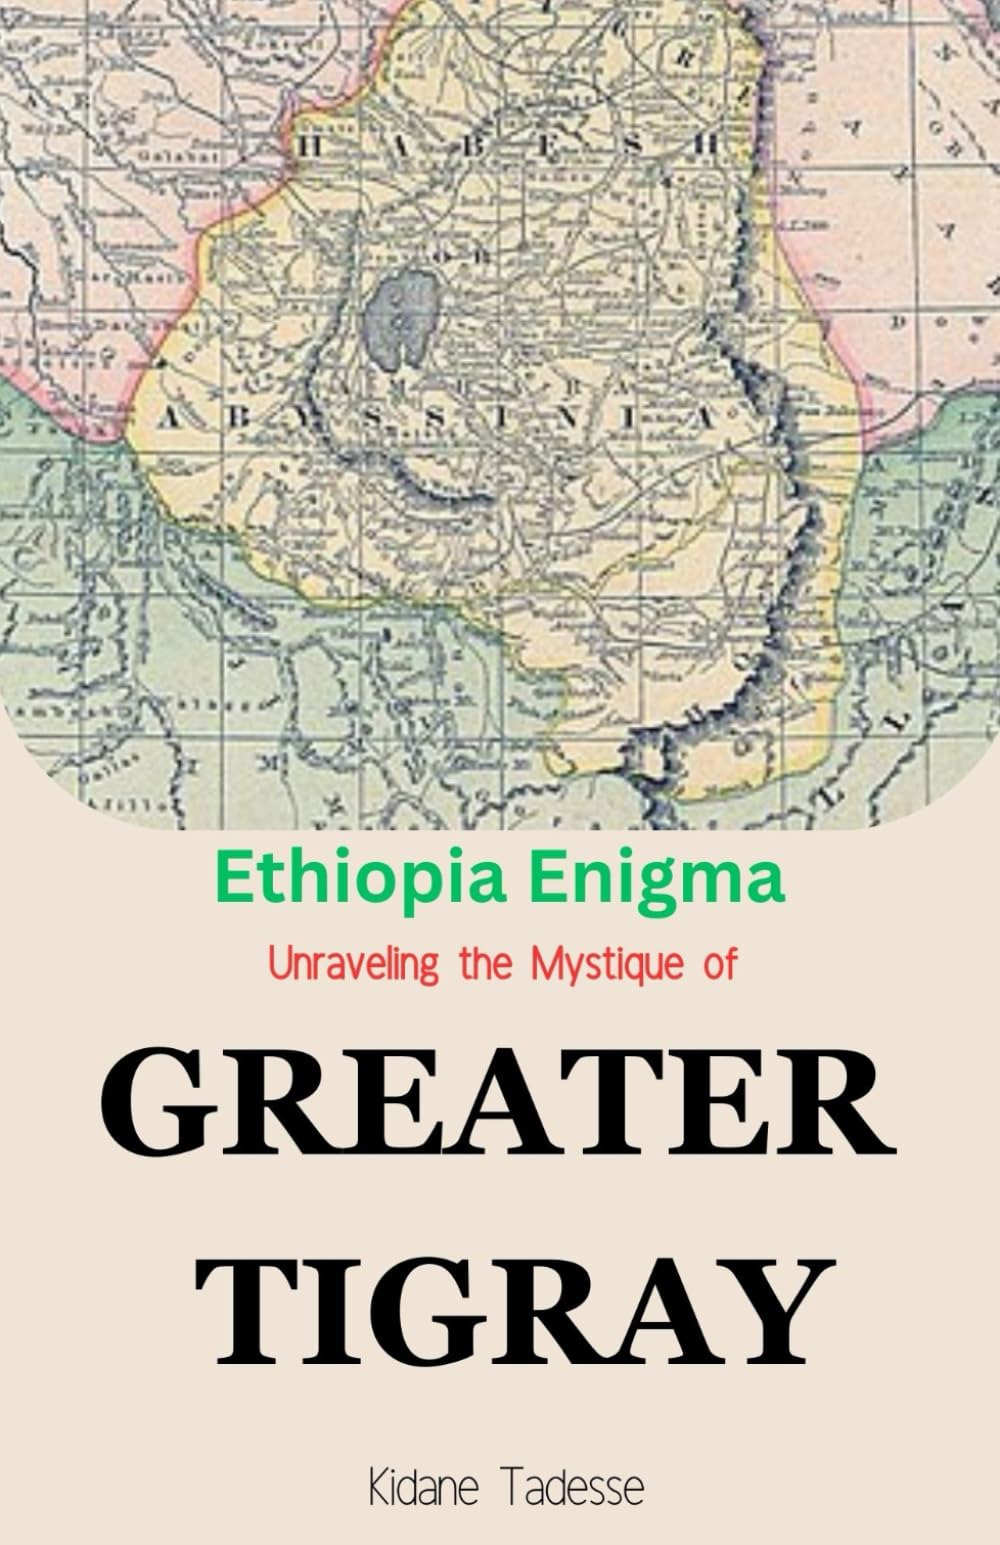 Ethiopian Enigma: Unraveling the Mystique of GREATER TIGRAY